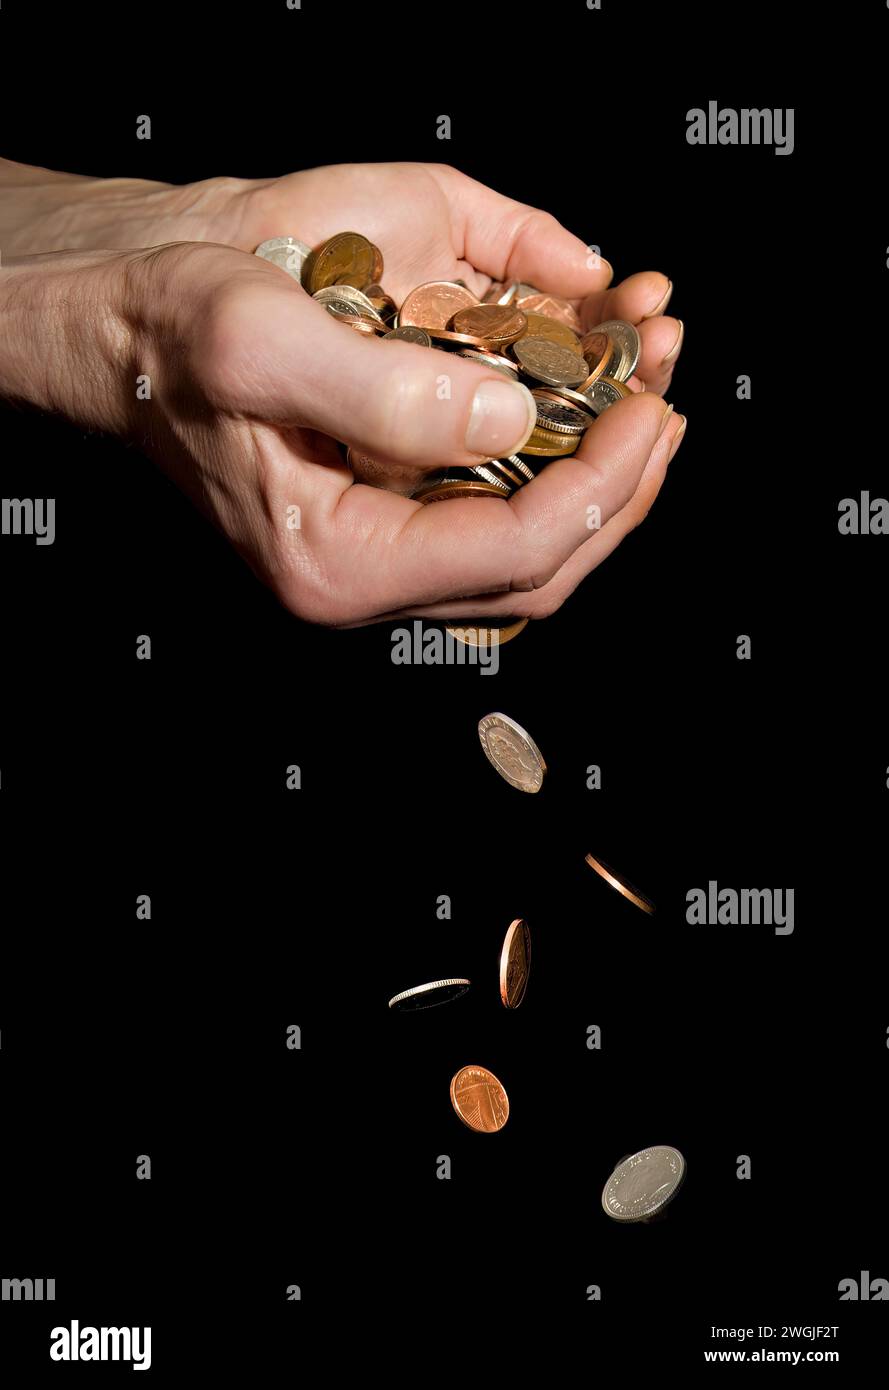 Caucasian male (42 yrs old) hands with money falling depicting the concept of ‘money slipping through hands’ or ‘too much money to hold’ Stock Photo